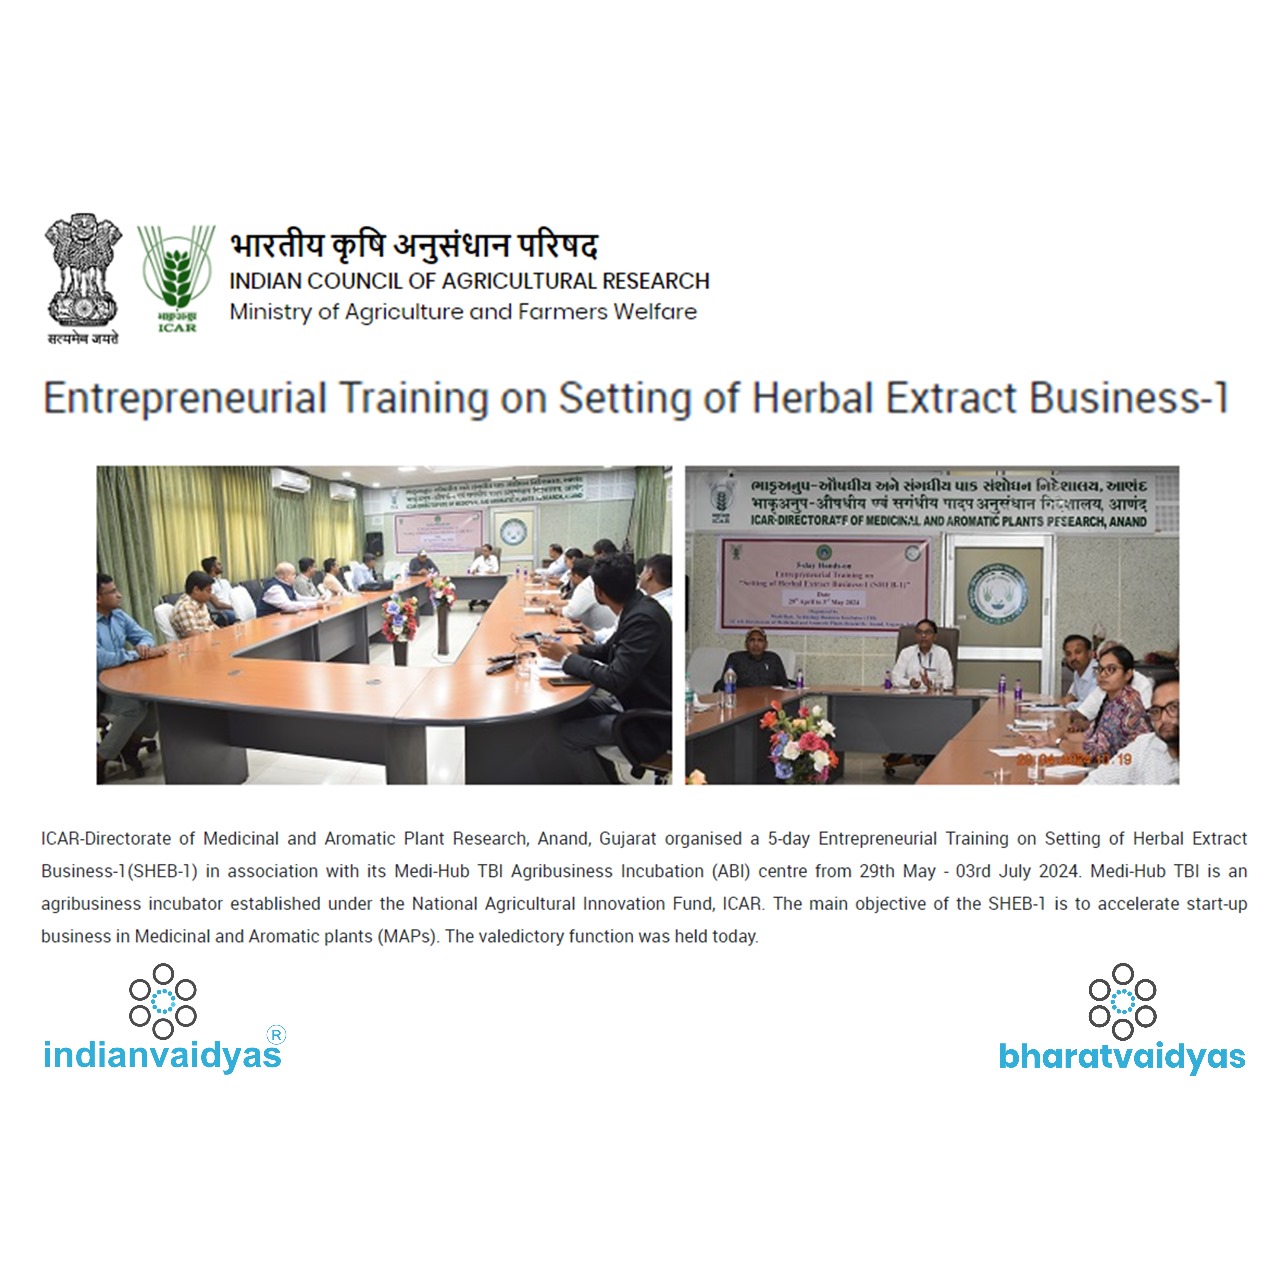 Entrepreneurial Training on Setting of Herbal Extract Business-1